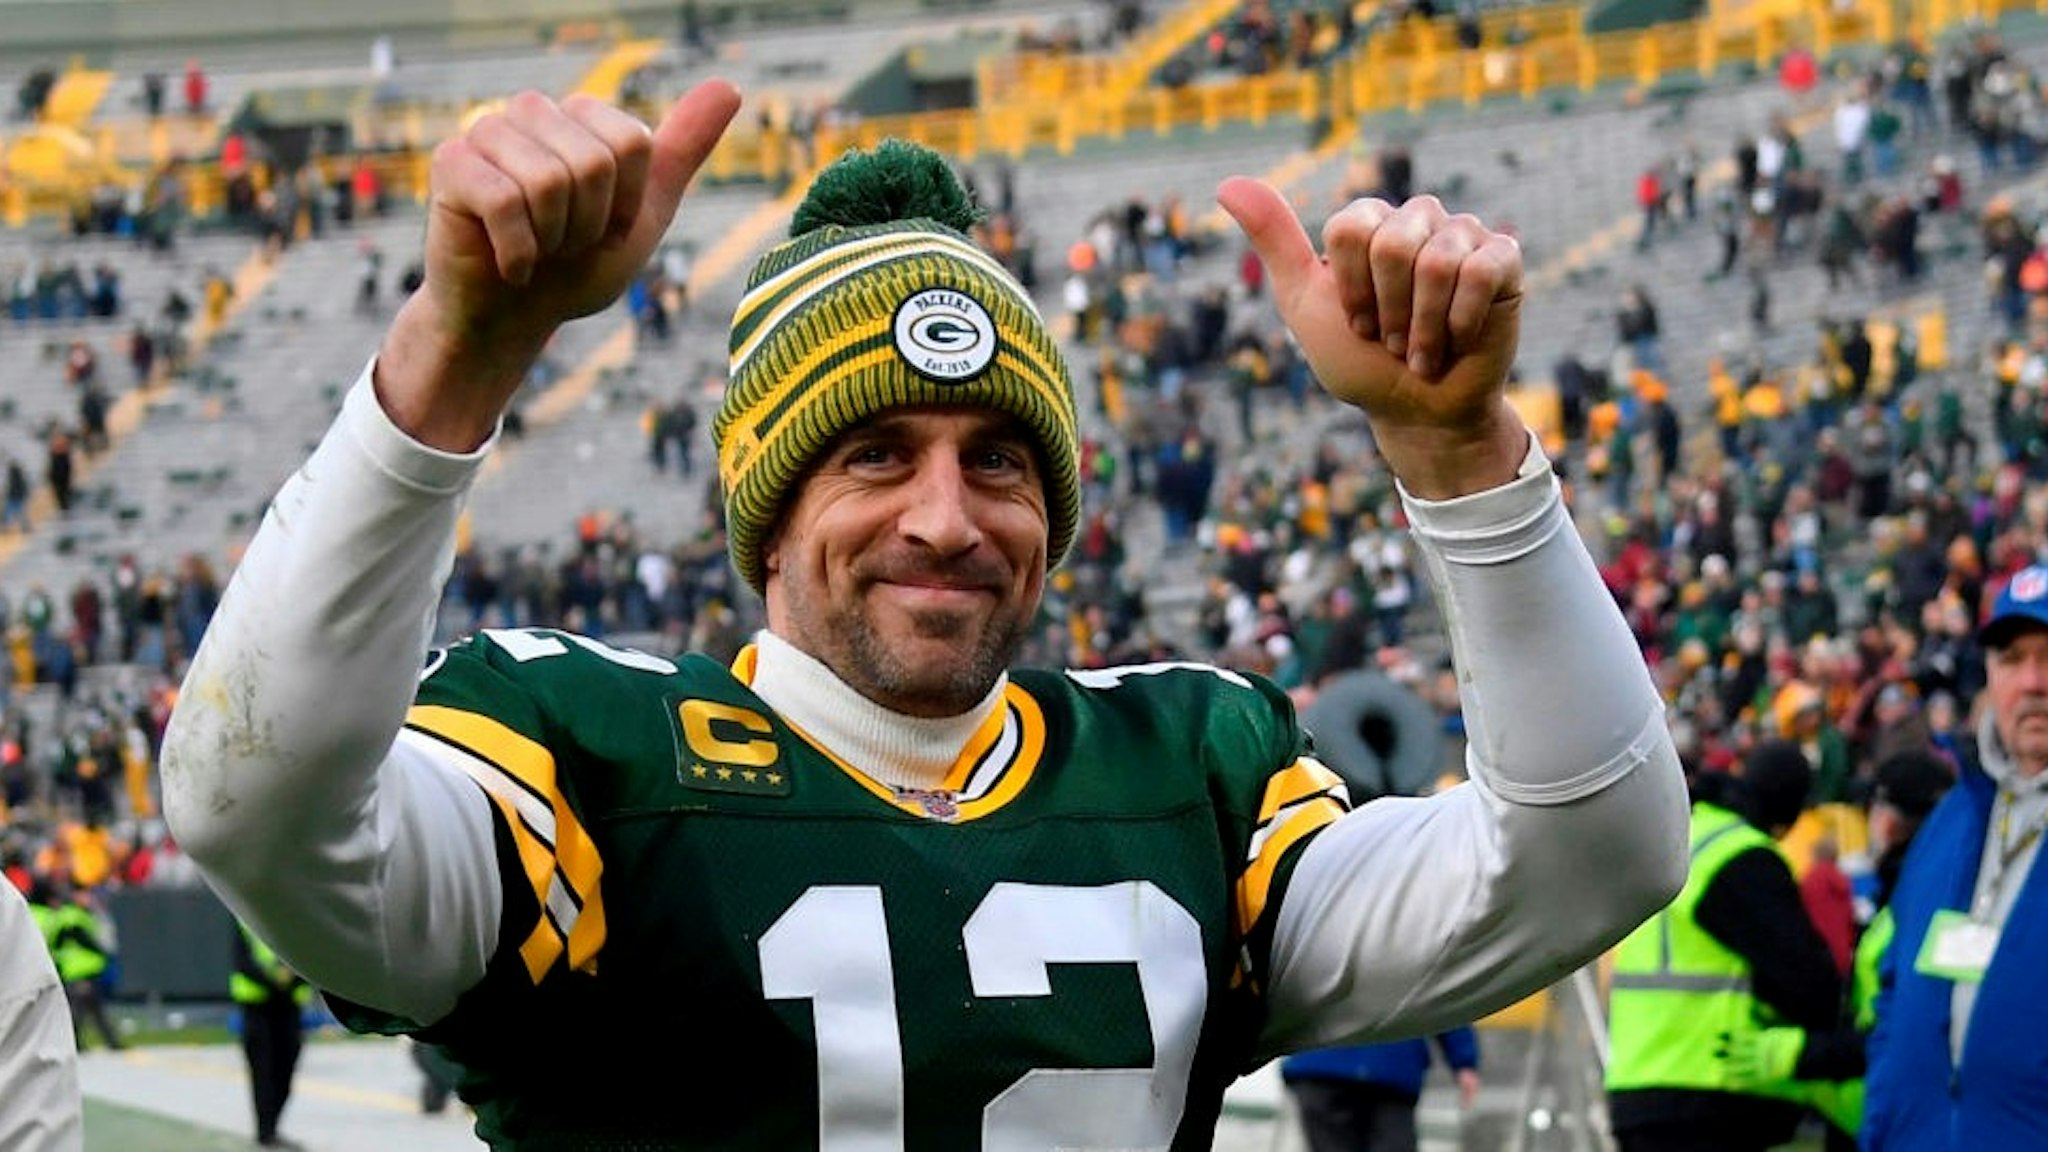 GREEN BAY, WISCONSIN - DECEMBER 08: Aaron Rodgers #12 of the Green Bay Packers reacts after getting the win against the Washington Redskins at Lambeau Field on December 08, 2019 in Green Bay, Wisconsin. (Photo by